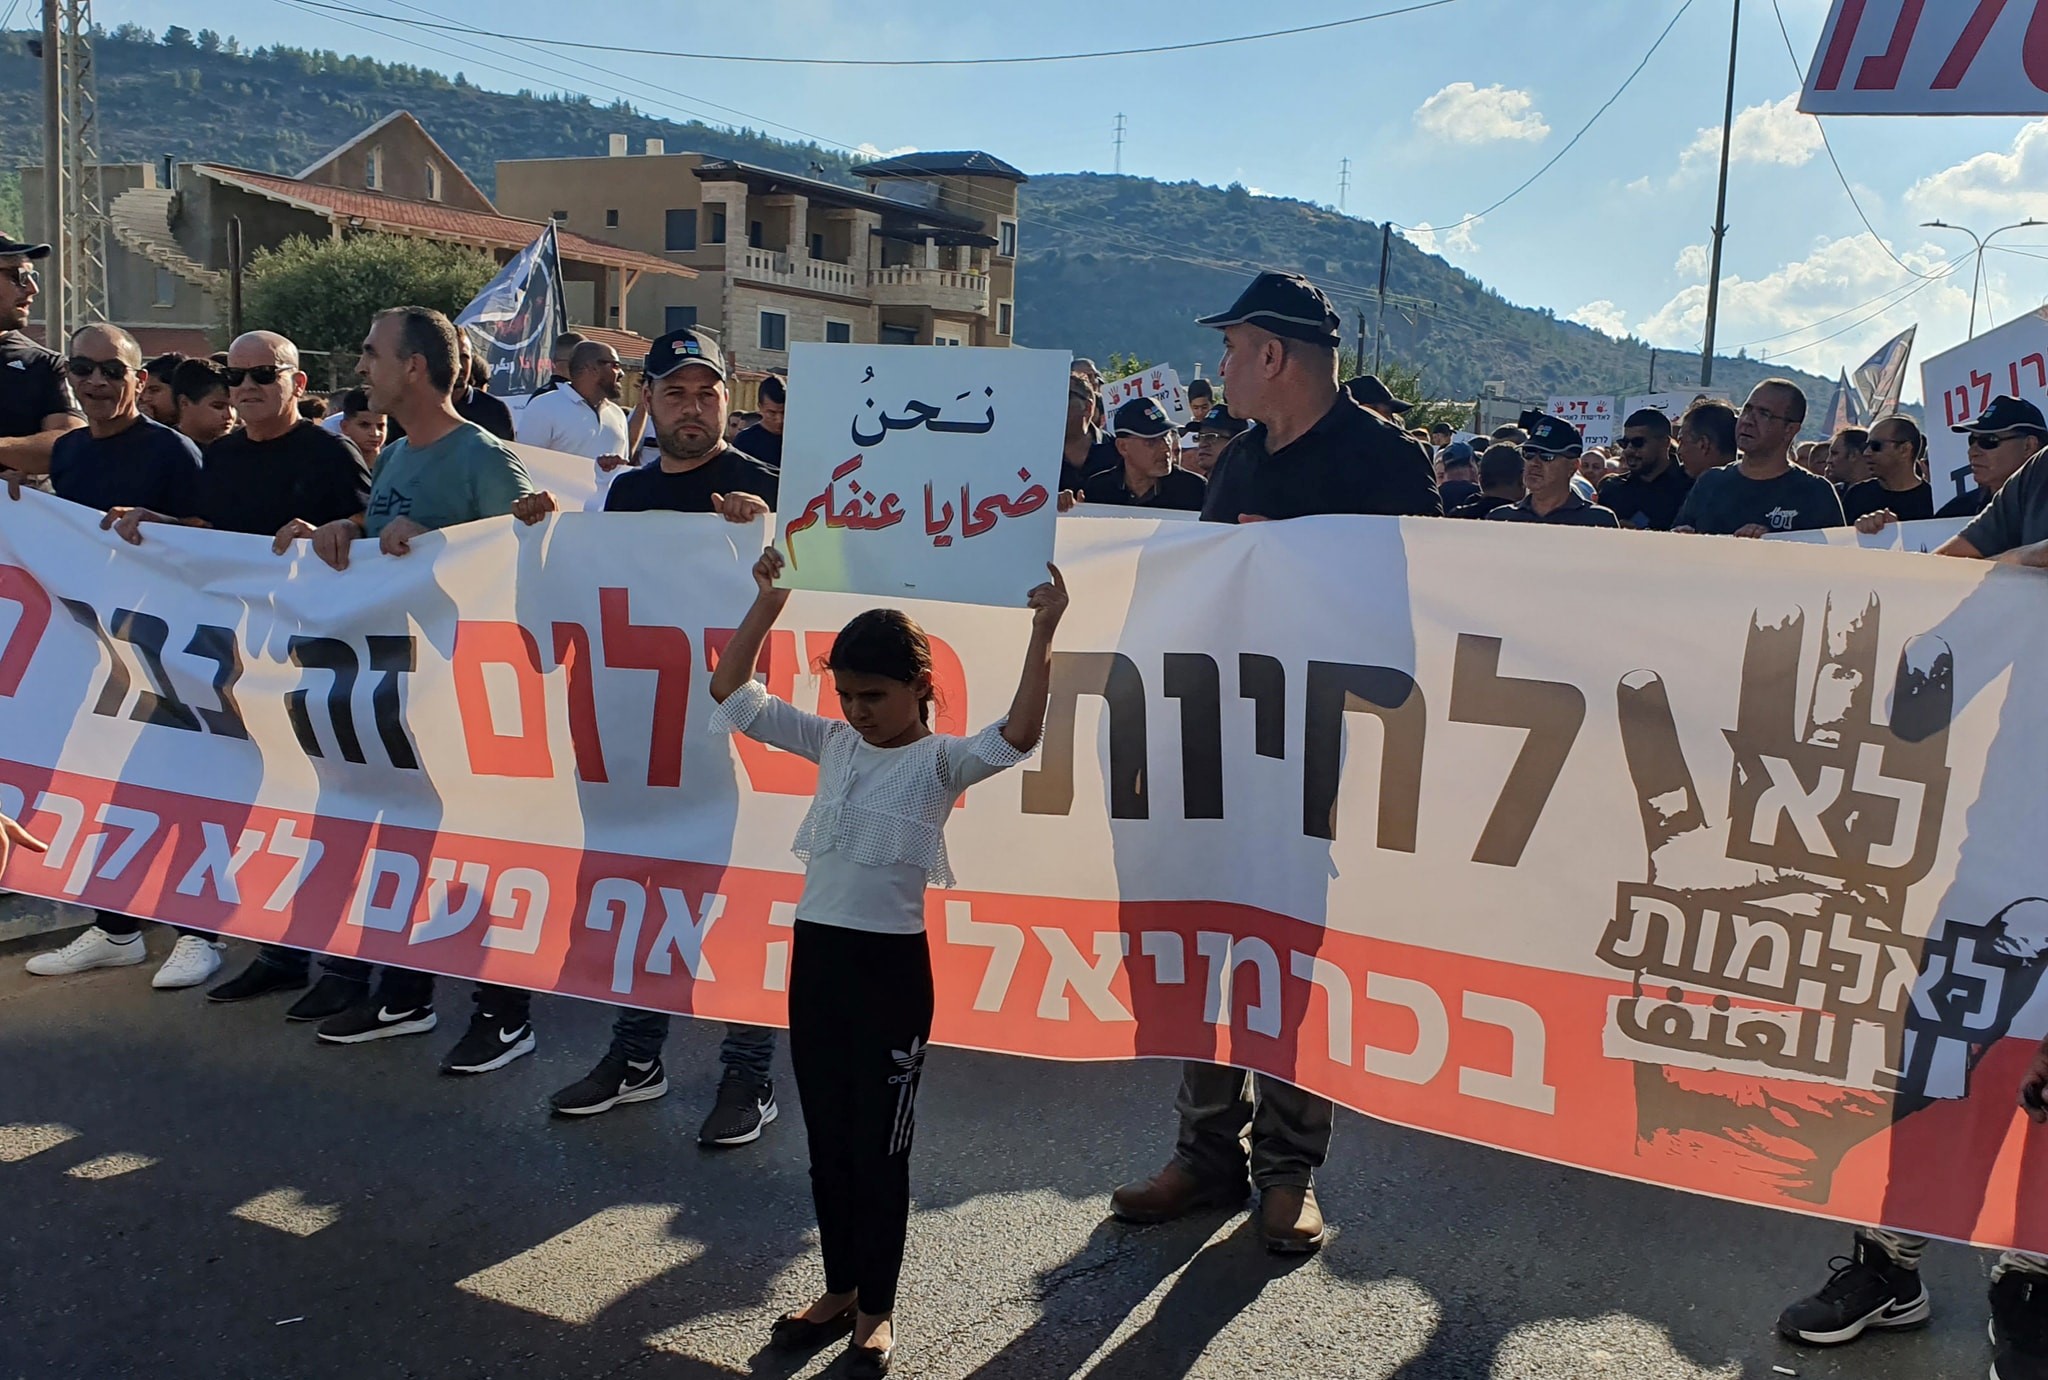 Demonstrators marching in the Upper Galilee town of Majd al-Krum on Thursday, October 3, to protest rampant gangland violence in Israel's Arab communities and police inaction in combating it; the large banner reads (in Hebrew): "No to Violence – To live in peace has become a dream... In Karmiel [a neighboring, primarily Jewish city just to the east of Majd al-Krum] this has never happened."Before the banner, a young girl holds aloft a sign in Arabic reading: "We are victims of your violence."